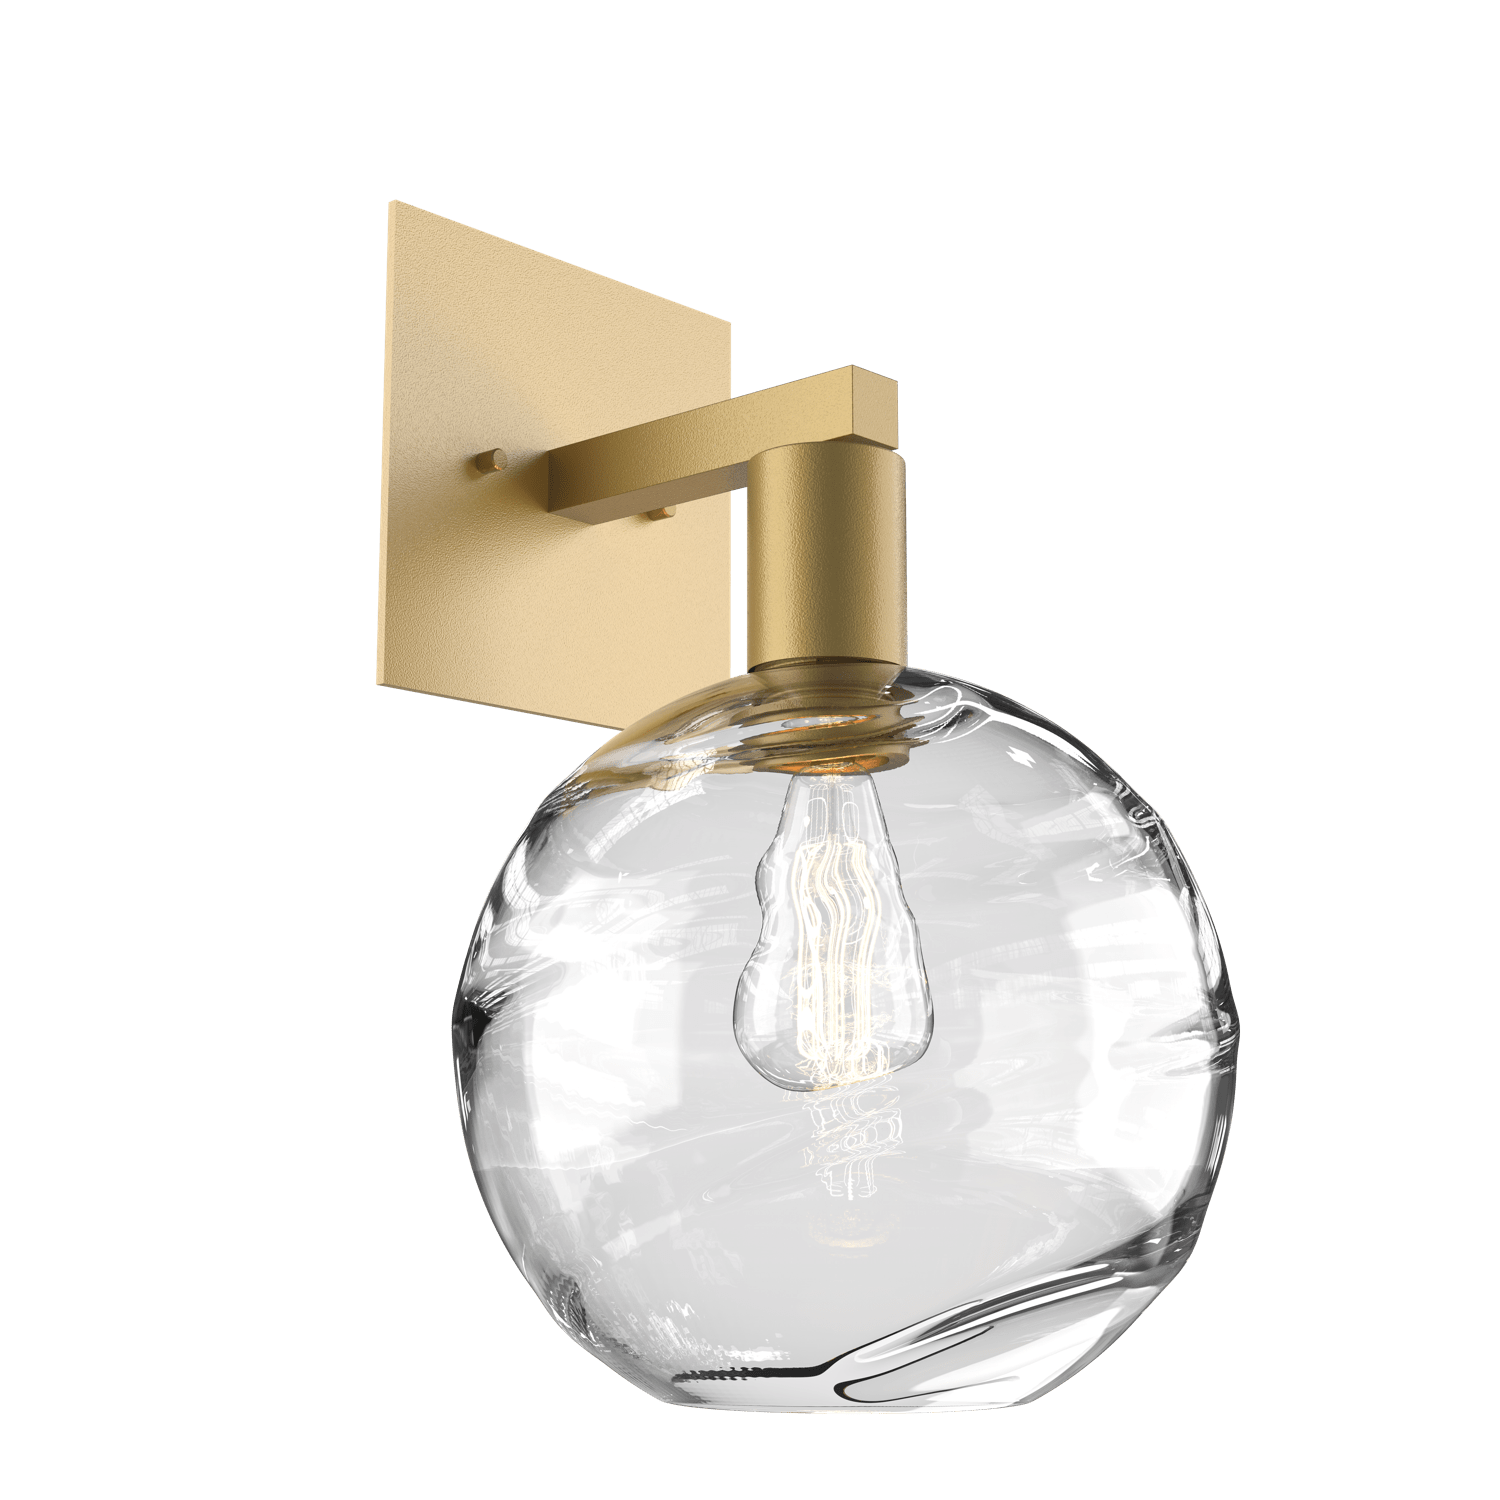 IDB0047-14-GB-OC-Hammerton-Studio-Optic-Blown-Glass-Terra-wall-sconce-with-gilded-brass-finish-and-optic-clear-blown-glass-shades-and-incandescent-lamping